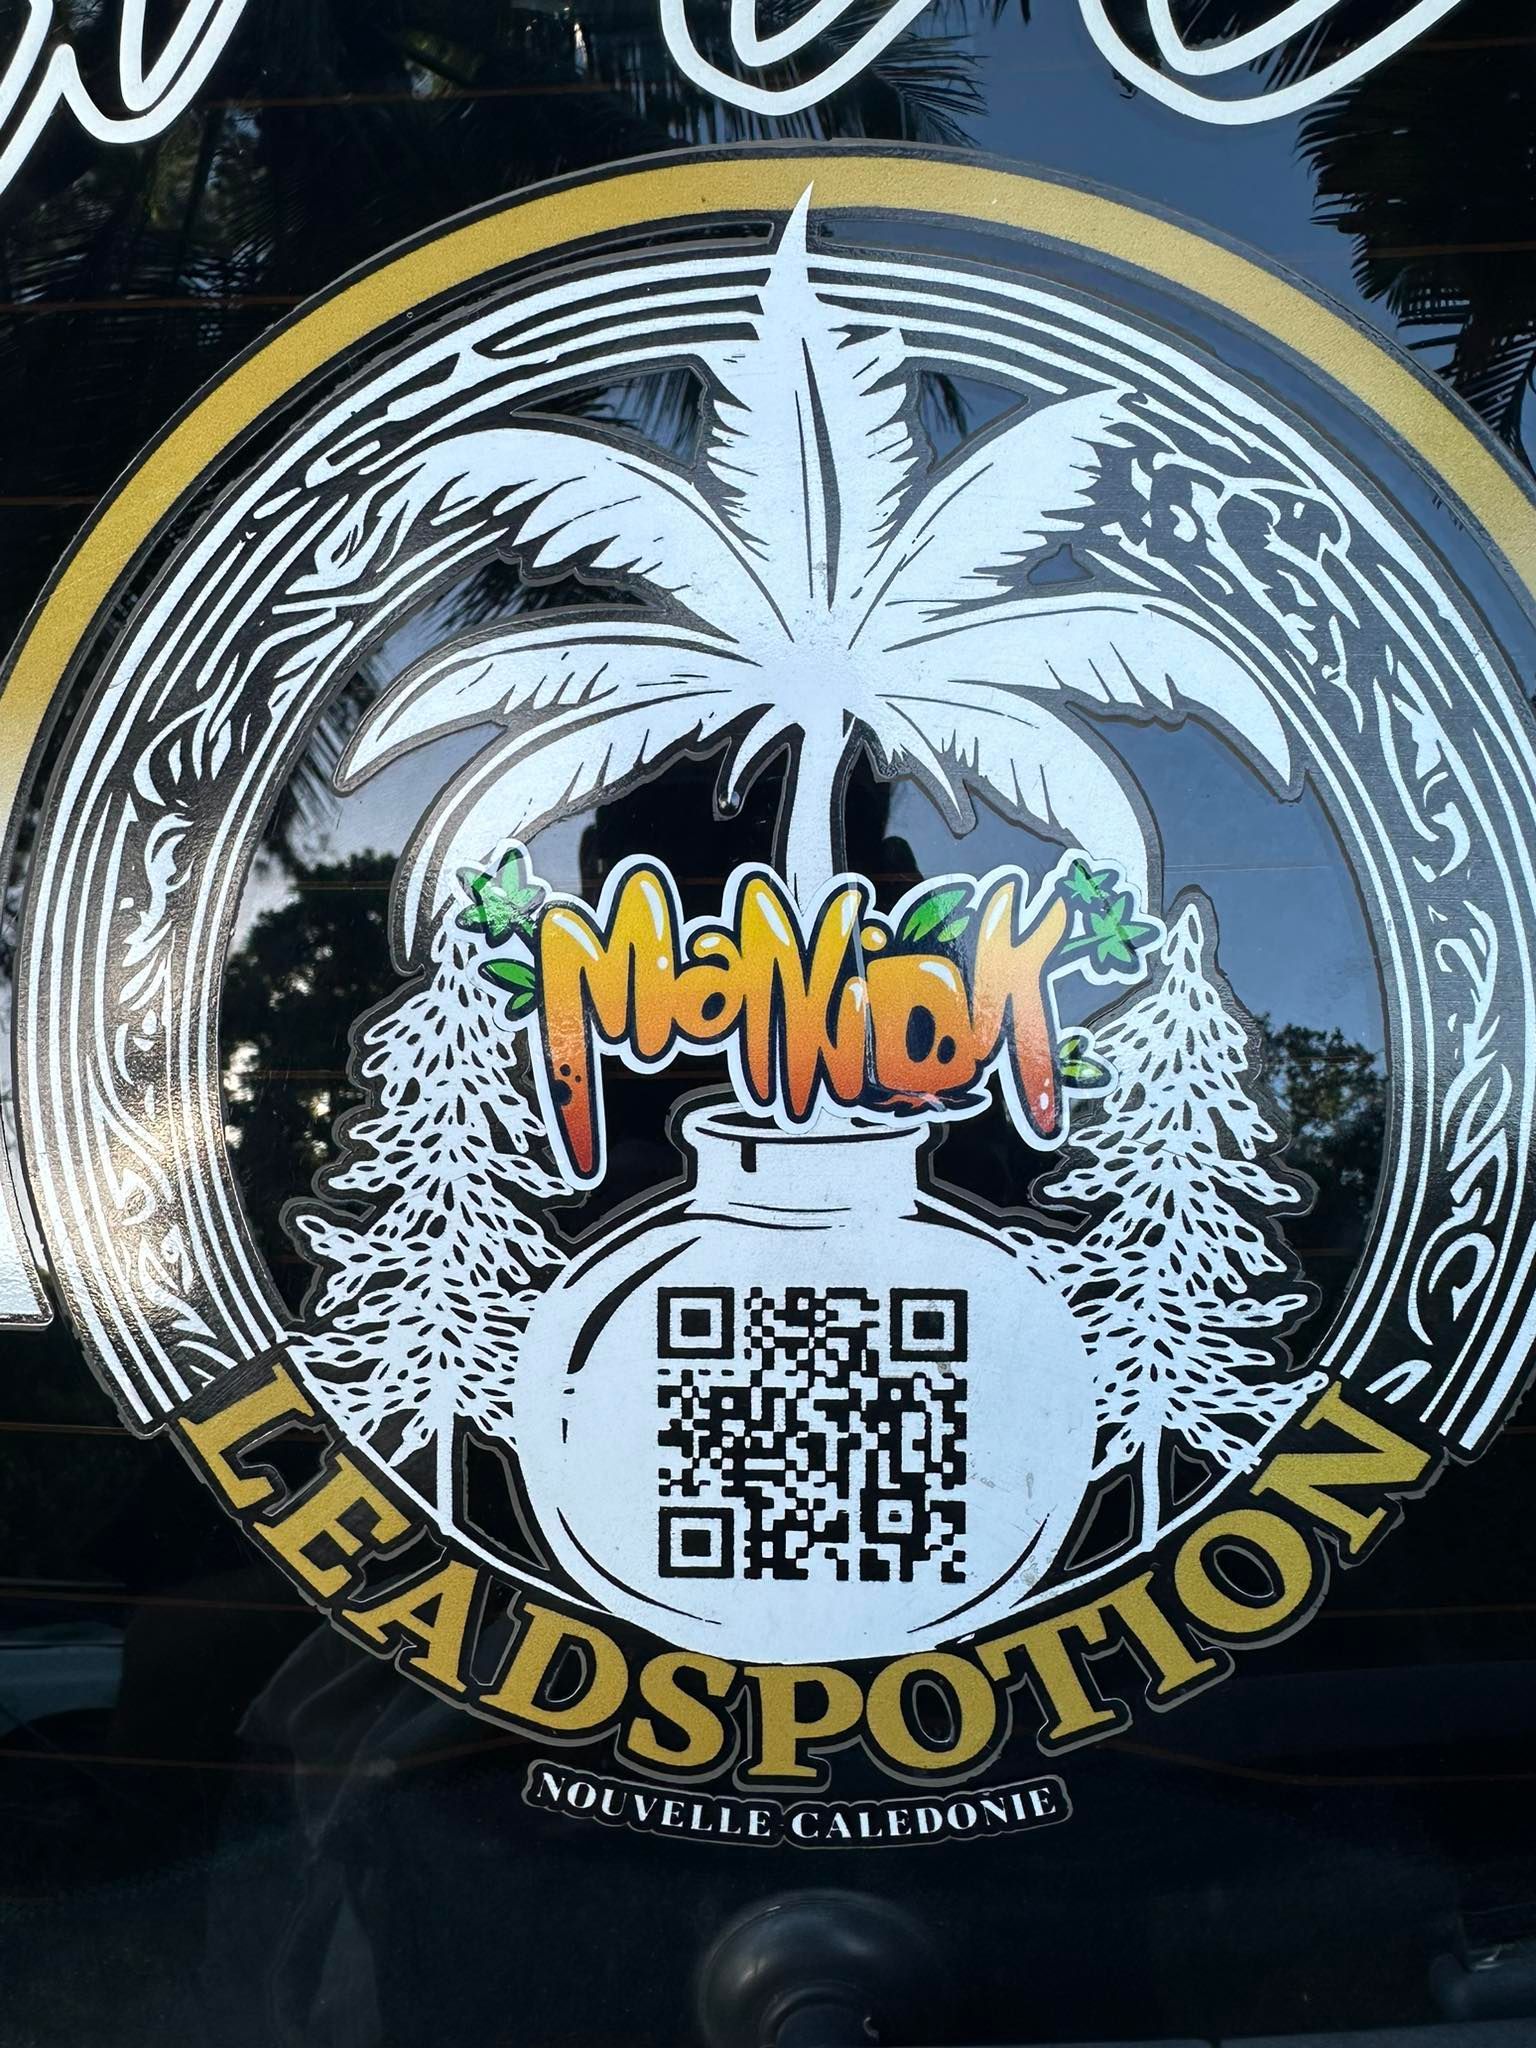 Leadspotion, a business based in New Caledonia, has announced an exciting creative connection